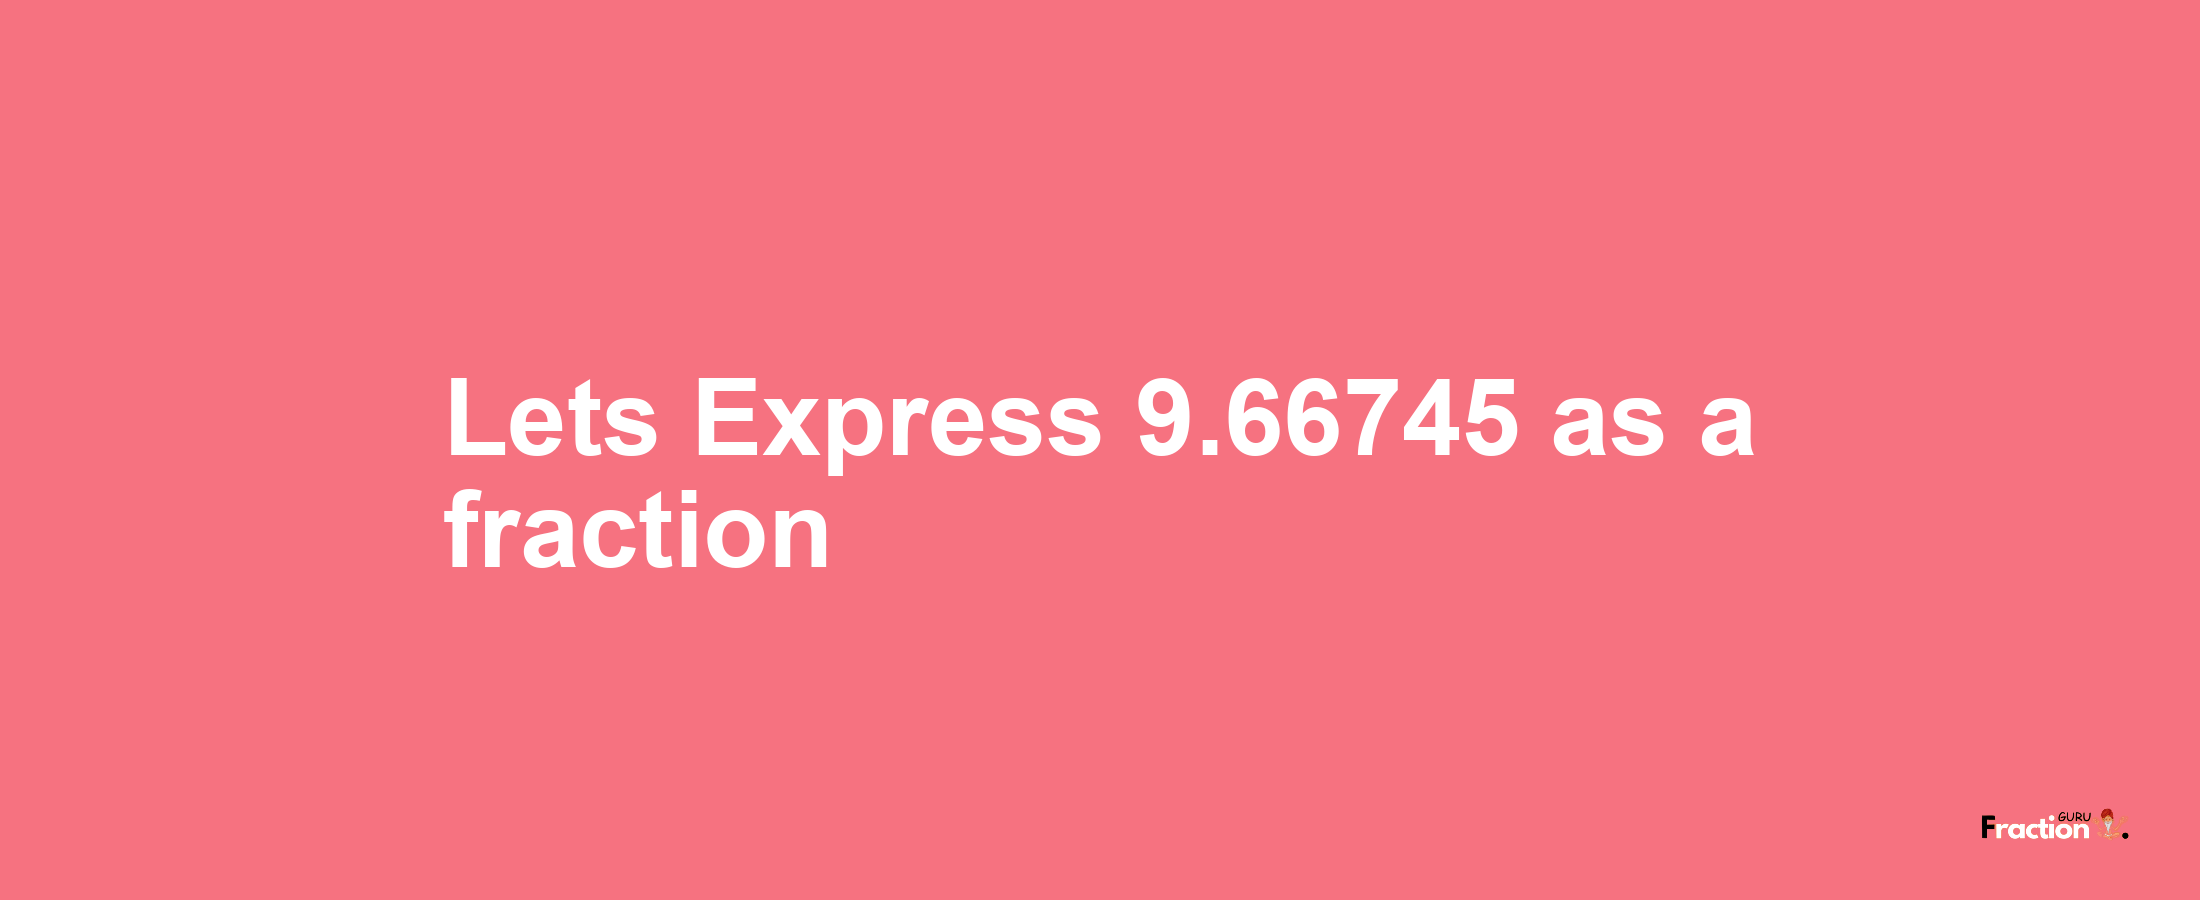 Lets Express 9.66745 as afraction